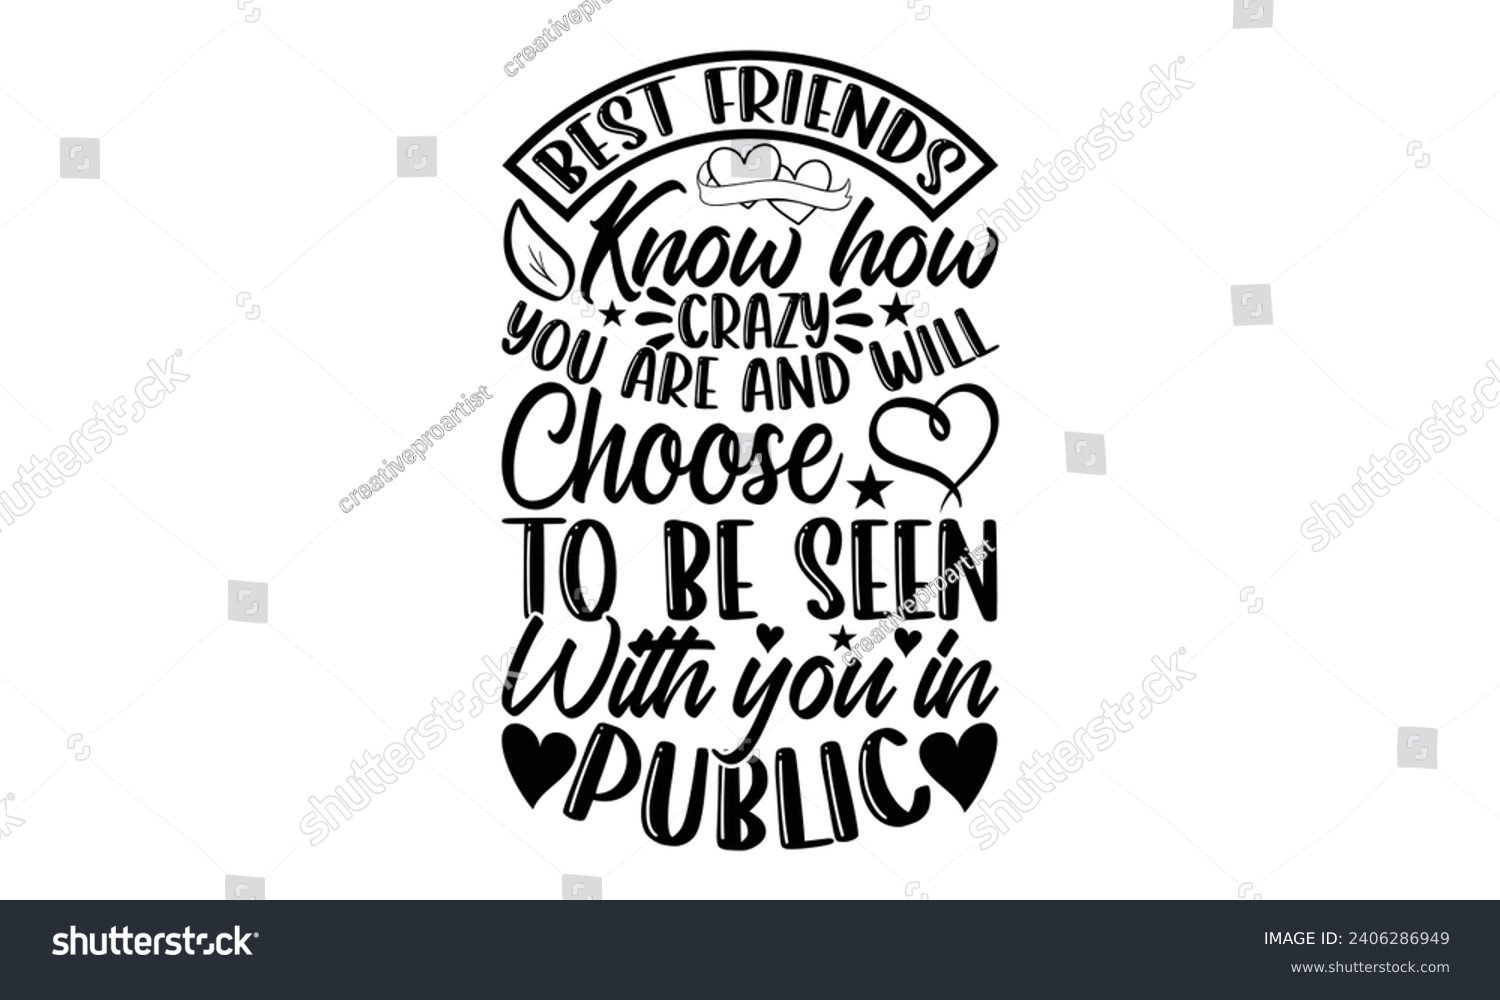 SVG of Best Friends Know How Crazy You Are And Will Choose To Be Seen With You In Public- Best friends t- shirt design, Hand drawn vintage illustration with hand-lettering and decoration elements, greeting c svg